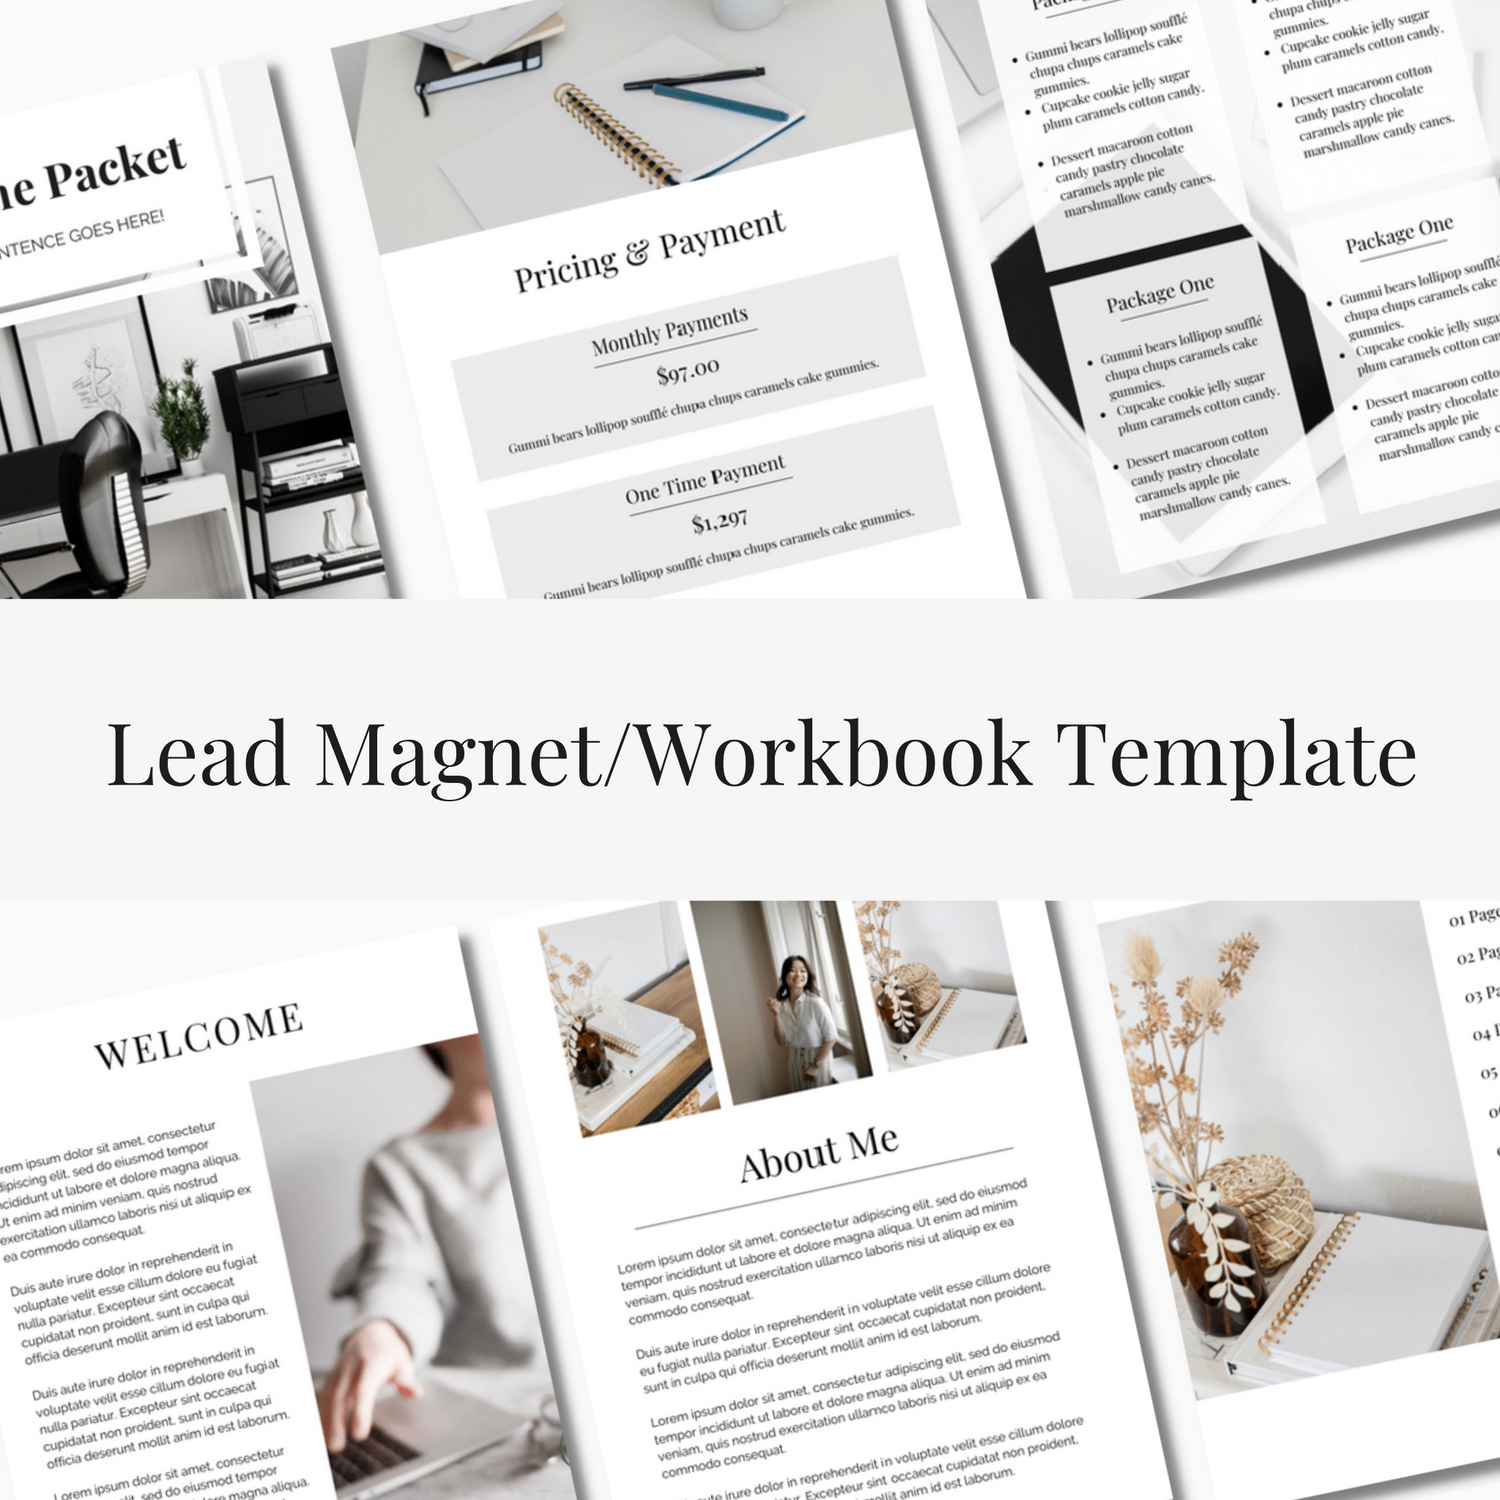 Neutral lead magnet and workbook templates professionally designed in Canva and easily customizable using a free Canva account. Easily market your services with a done-for-you template bundle that provides all the relevant information your potential and existing clients need to work with you successfully. The neutral lead magnet template is perfect for sharing important information with your audience so you can market your services and boost conversions. 